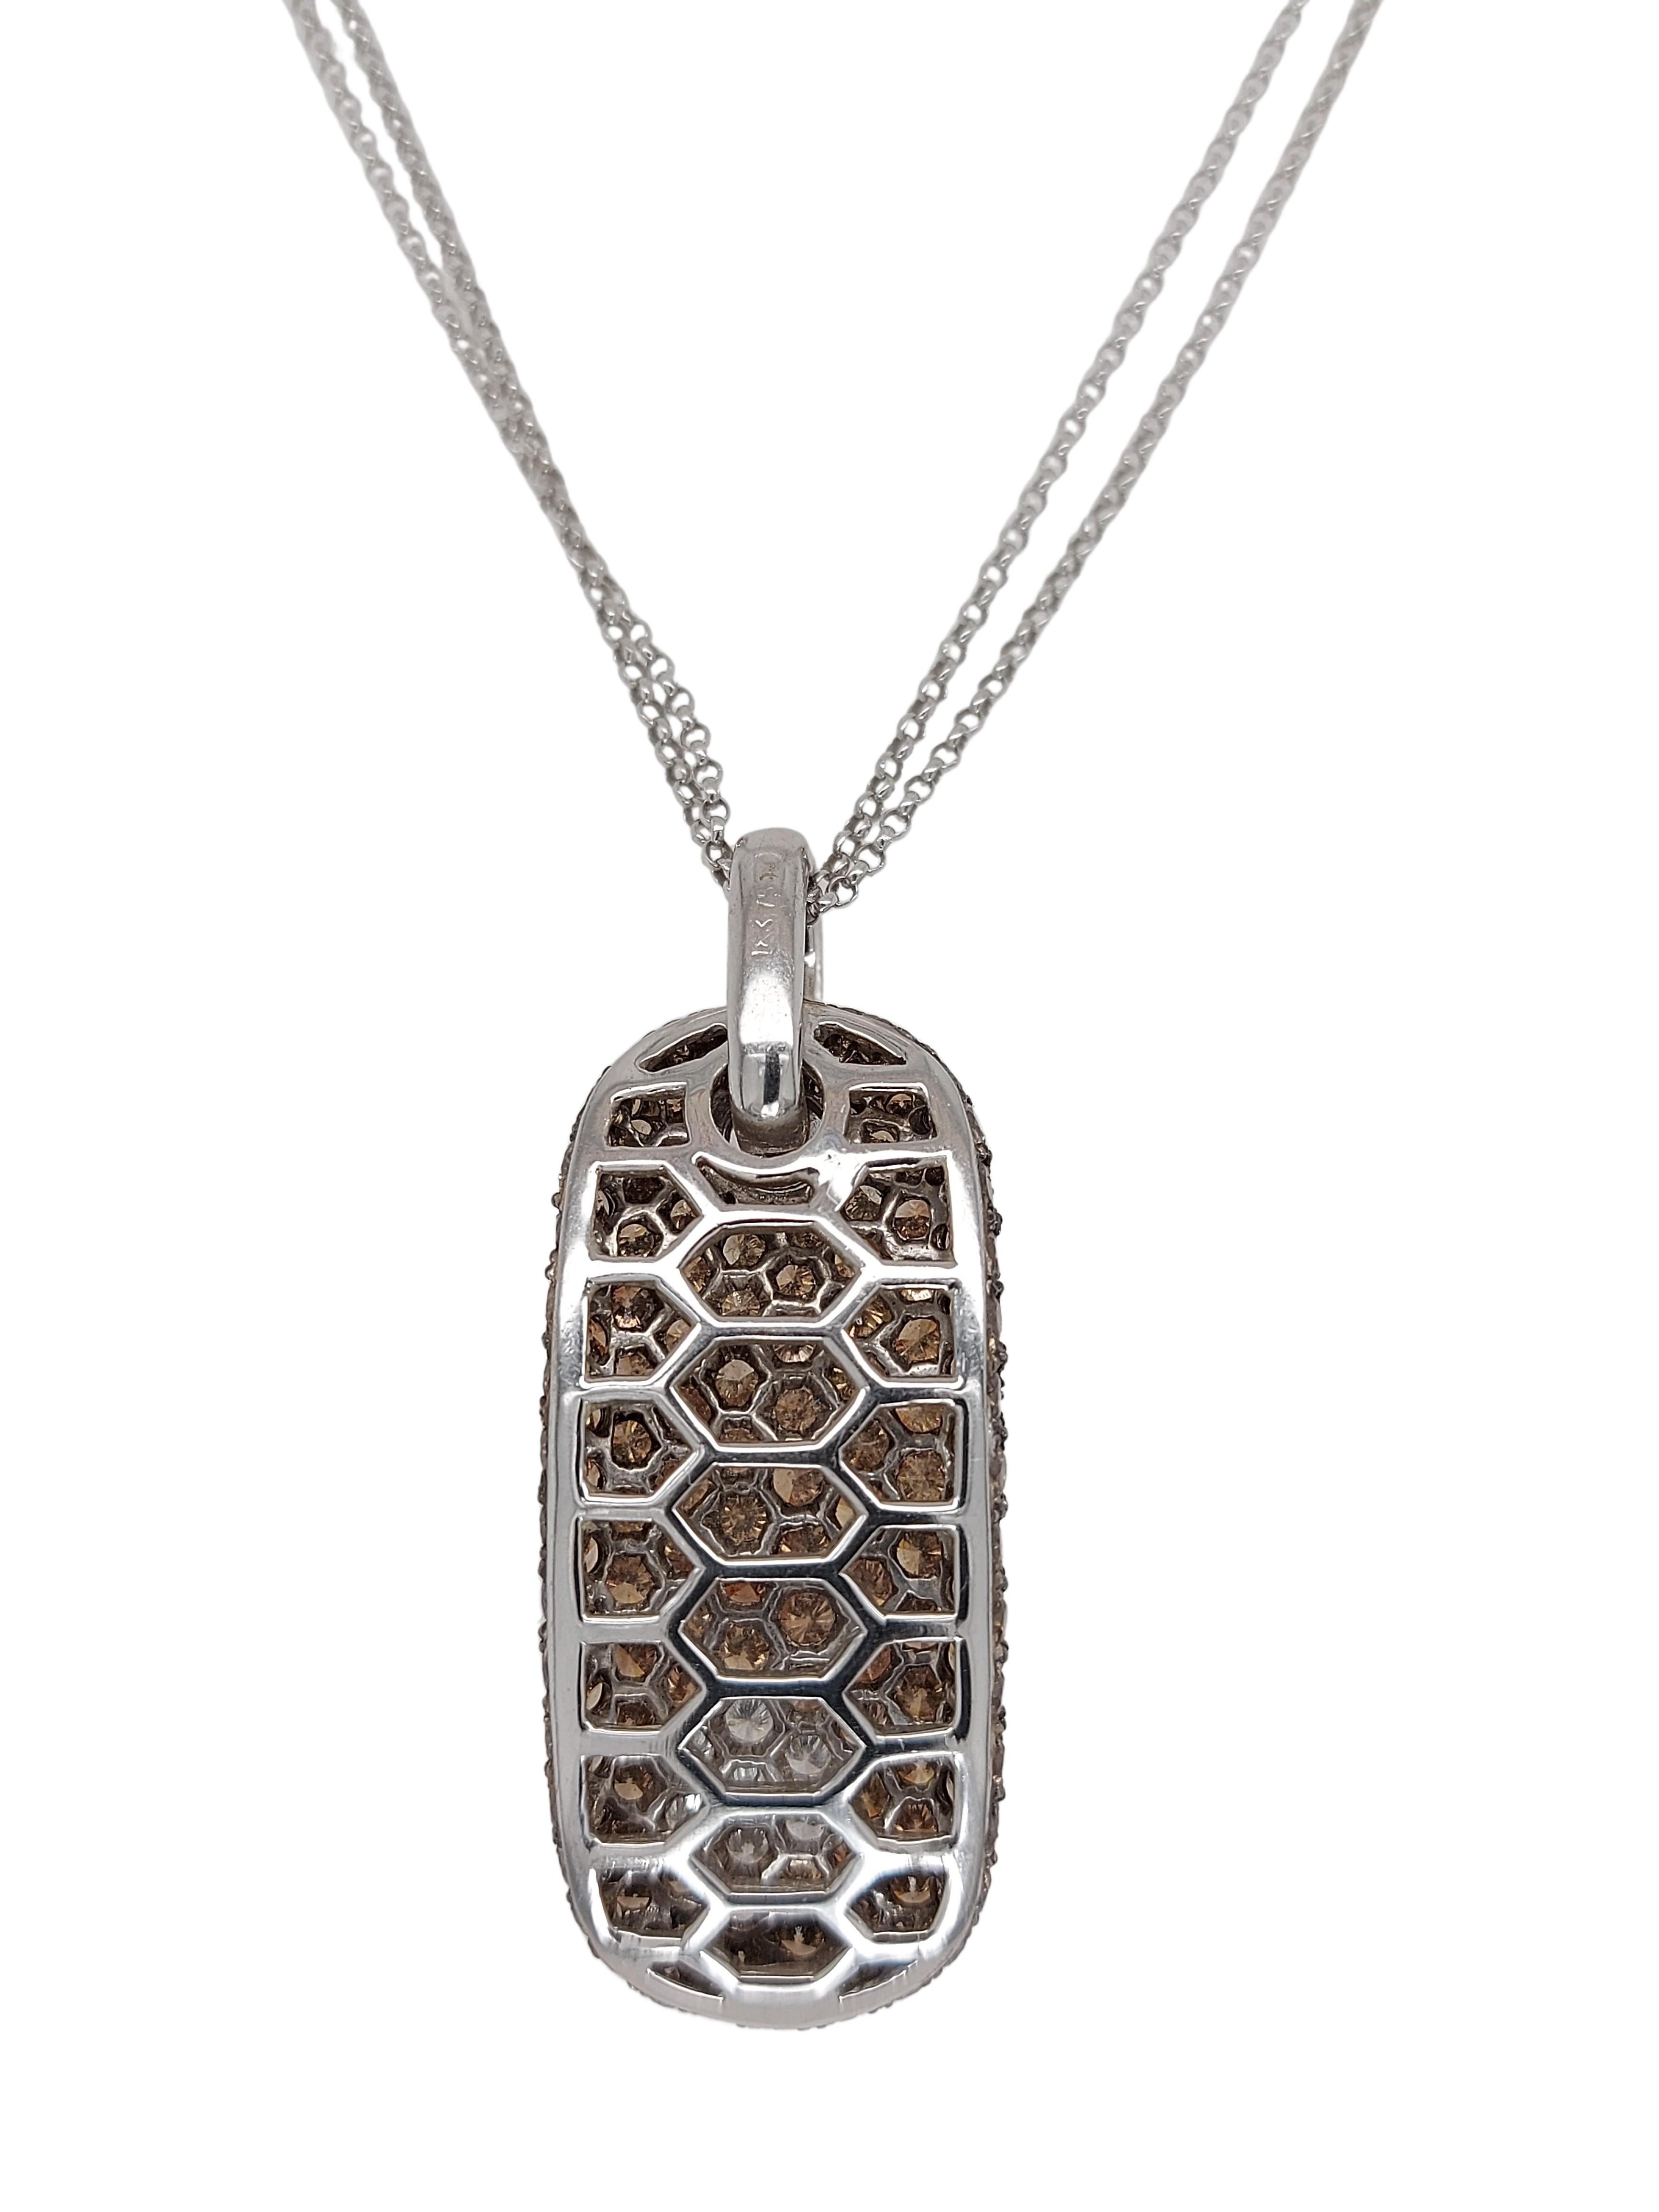 Brilliant Cut 18kt White Gold Pendant, Necklace with 0.28ct White & 6ct Brown Diamonds For Sale